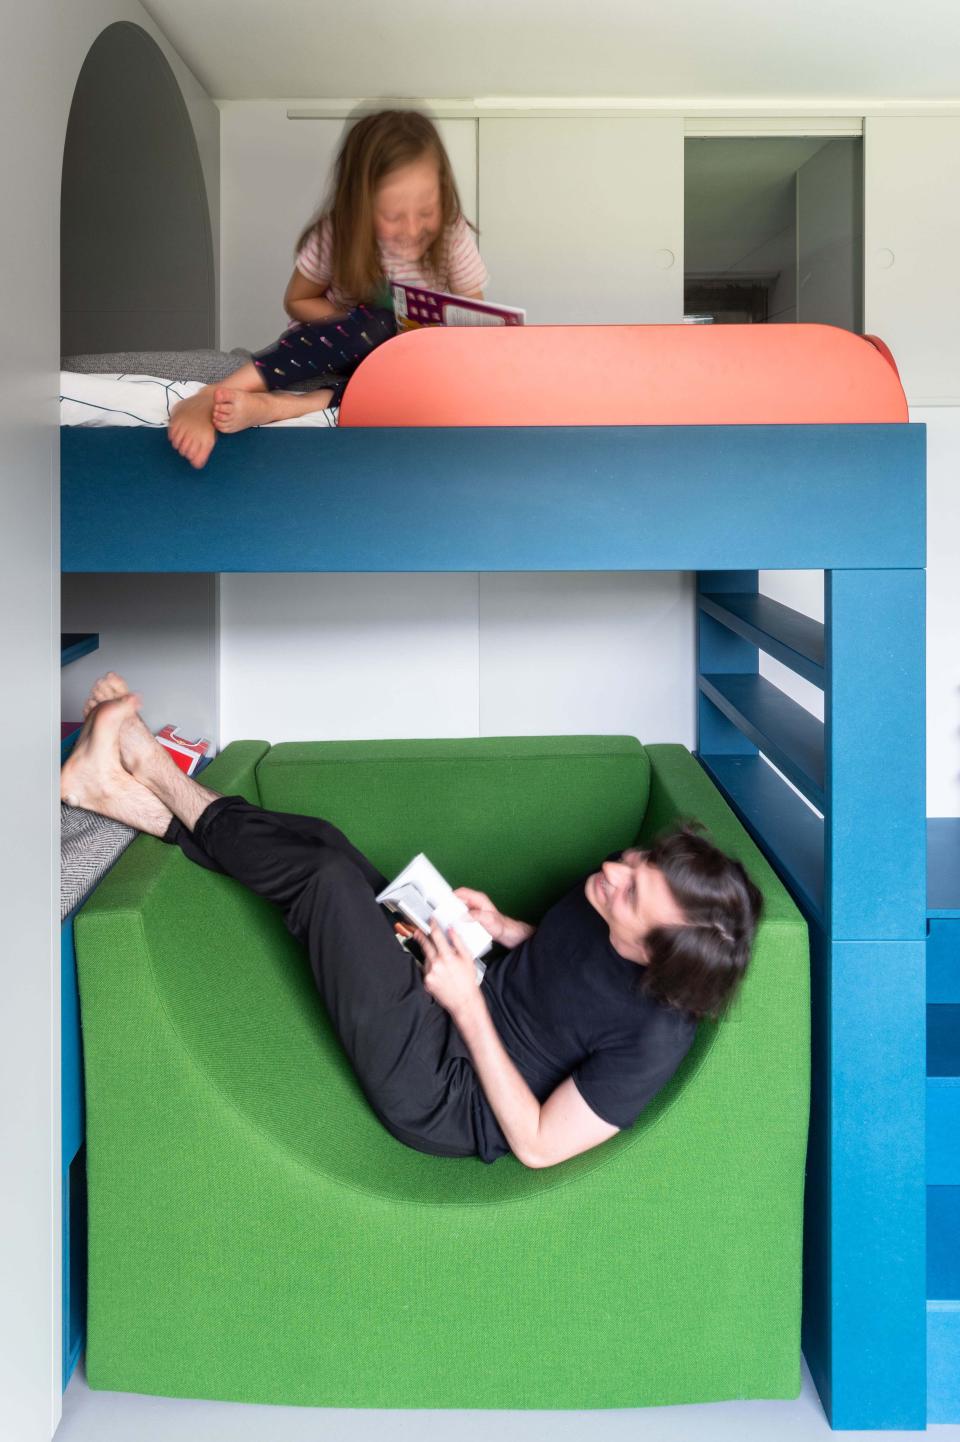 Because many elements are freestanding, Ben points out, “the upholstered seat can be positioned under the bed or elsewhere in the room, freeing up the space under the bed for play and to access the additional storage located there.”